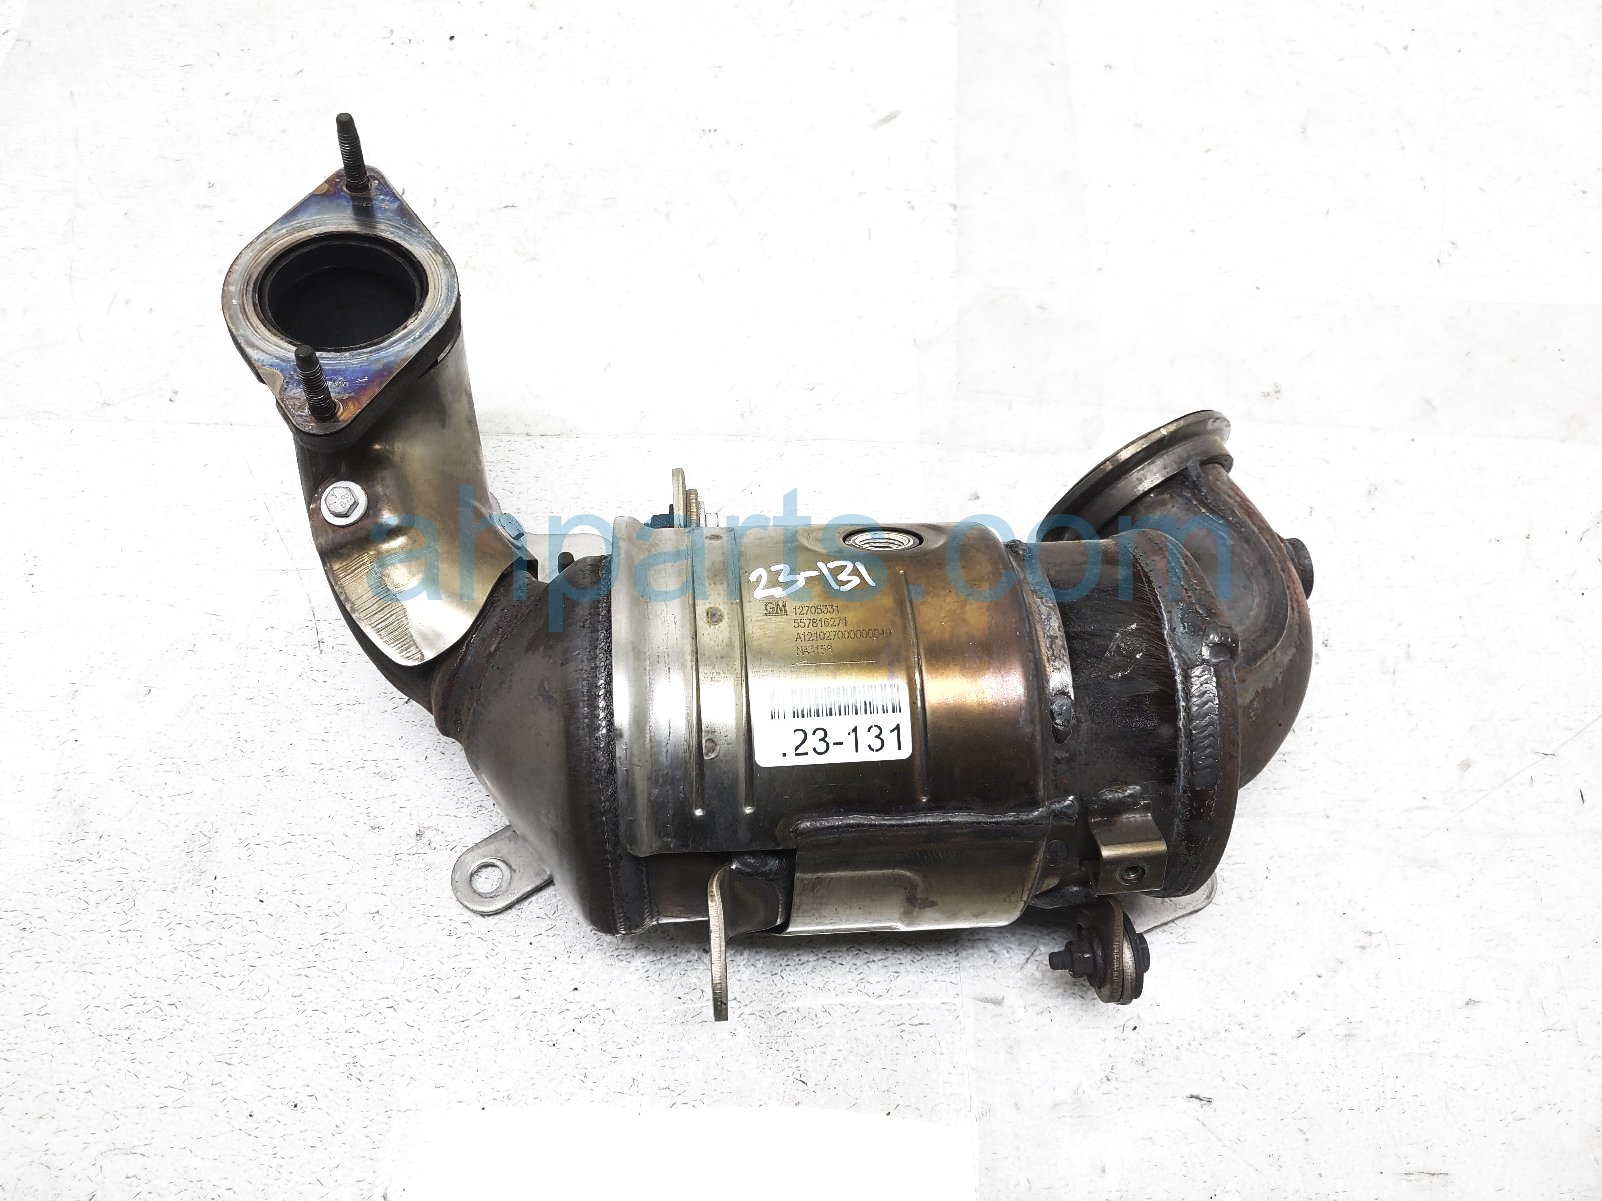 $349 Buick FRONT EXHAUST CONVERTER - 1.3L